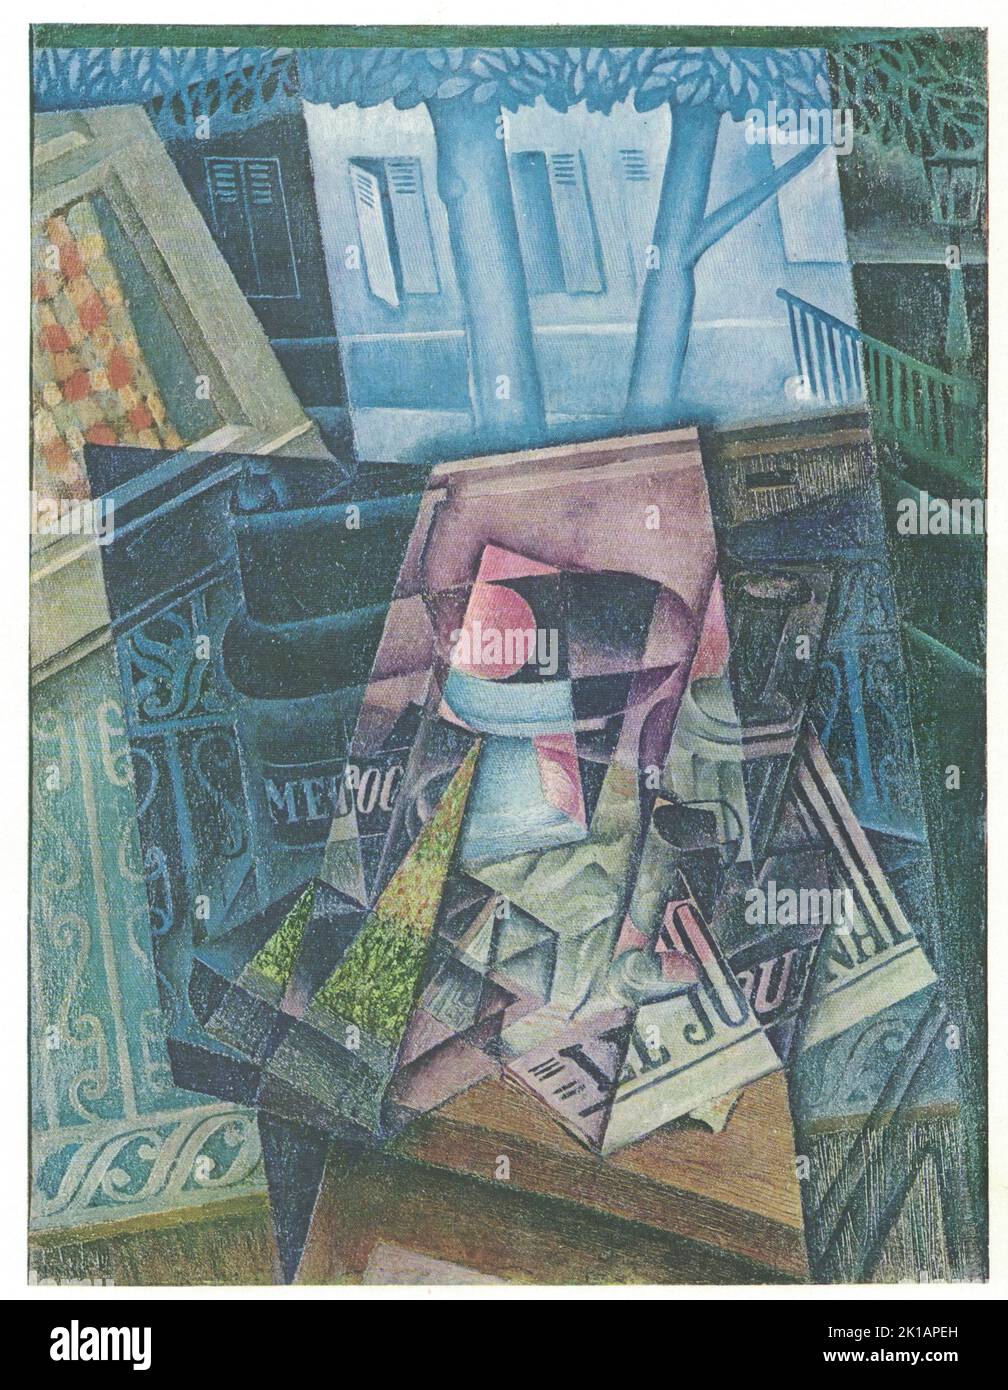 Still Life before an Open Window, Place Ravignan (1915). Painting by Juan Gris. Oil on canvas, Synthetic Cubism, Still Life. Juan Gris is recognized along with Pablo Picasso, Georges Braque, and Fernand L ger as one of the four major figures in Cubism, the avant-garde 20th-century art movement that revolutionized European painting and sculpture. Gris was born in 1887 in Madrid, where he later studied engineering from 1902 to 1904. Gradually, he started to shift his attention to drawing and began creating illustrations for local periodicals. Stock Photo